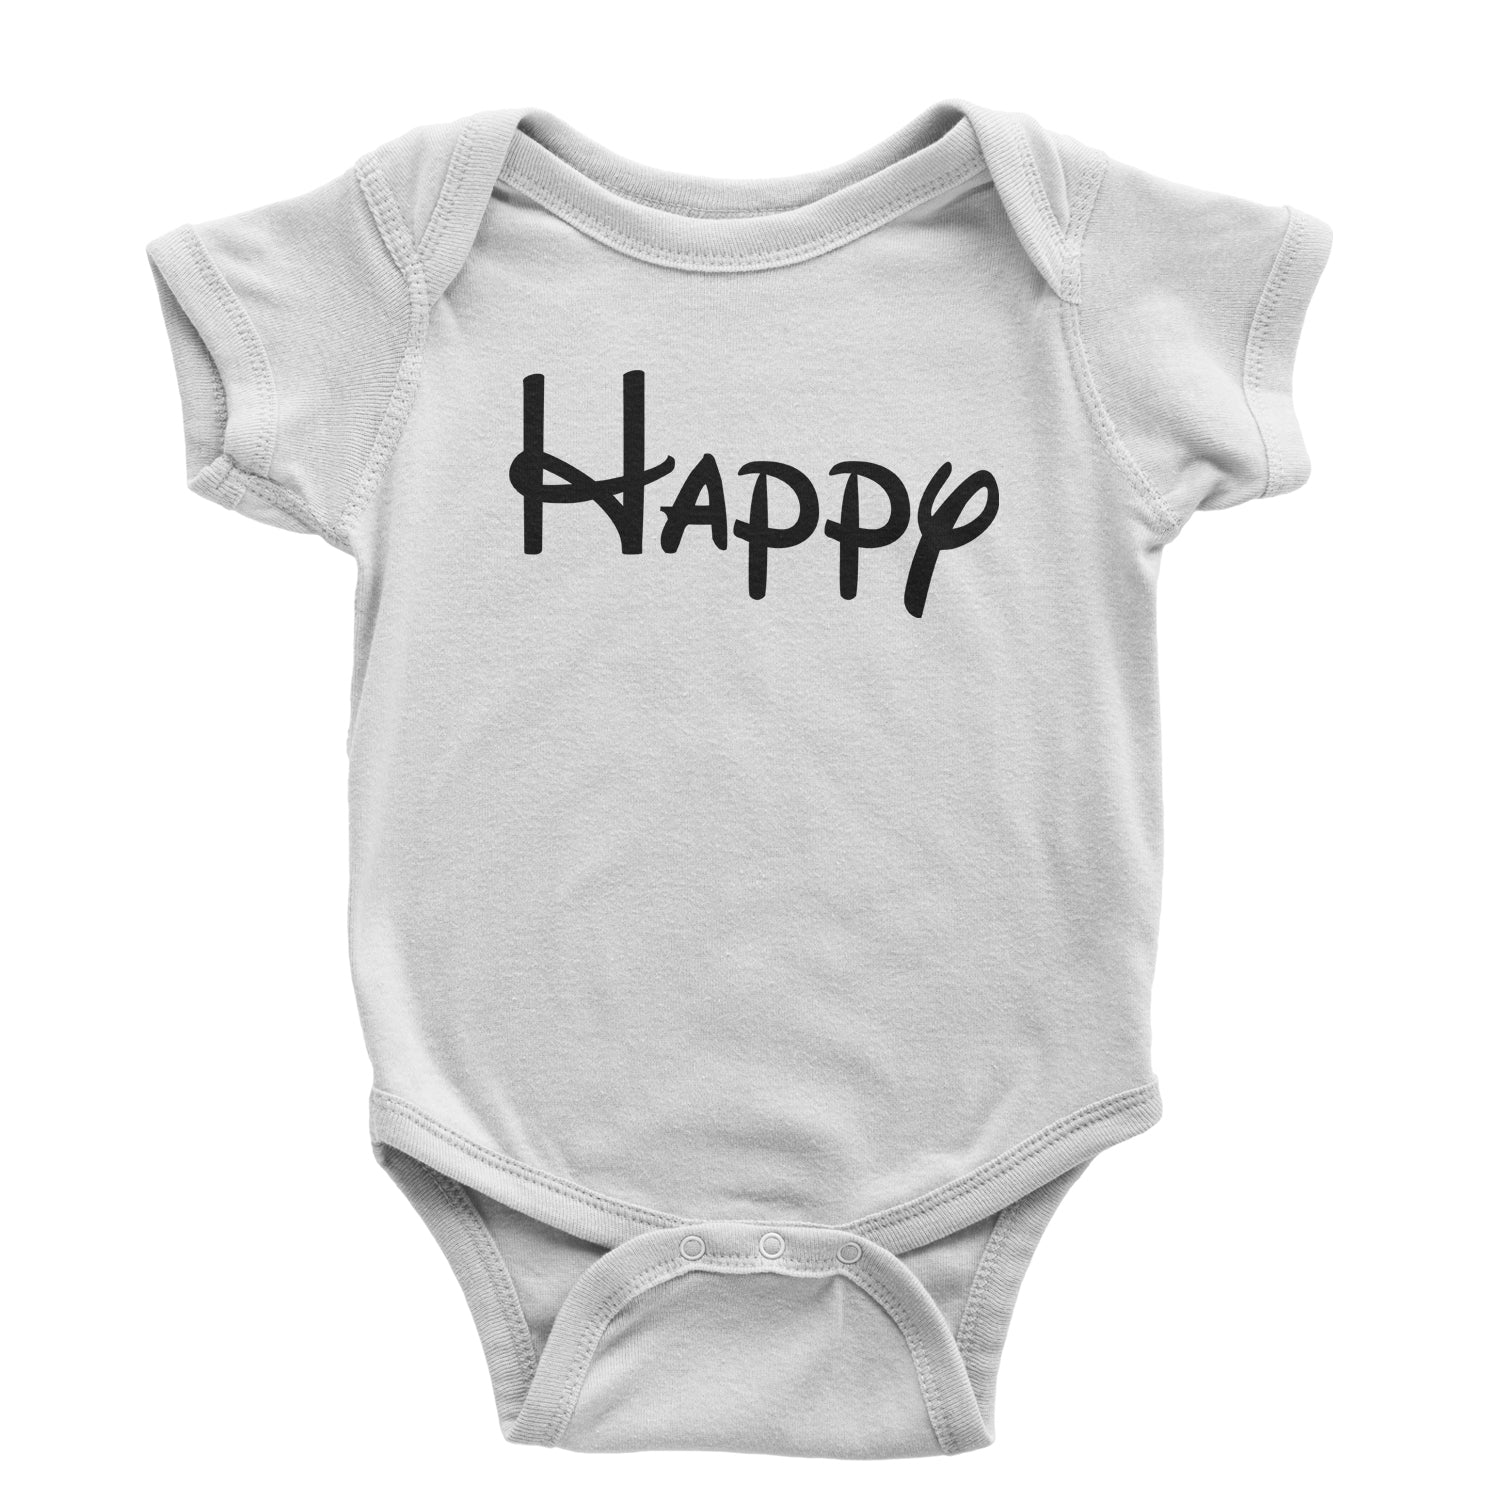 Happy - 7 Dwarfs Costume Infant One-Piece Romper Bodysuit and, costume, dwarfs, group, halloween, matching, seven, snow, the, white by Expression Tees